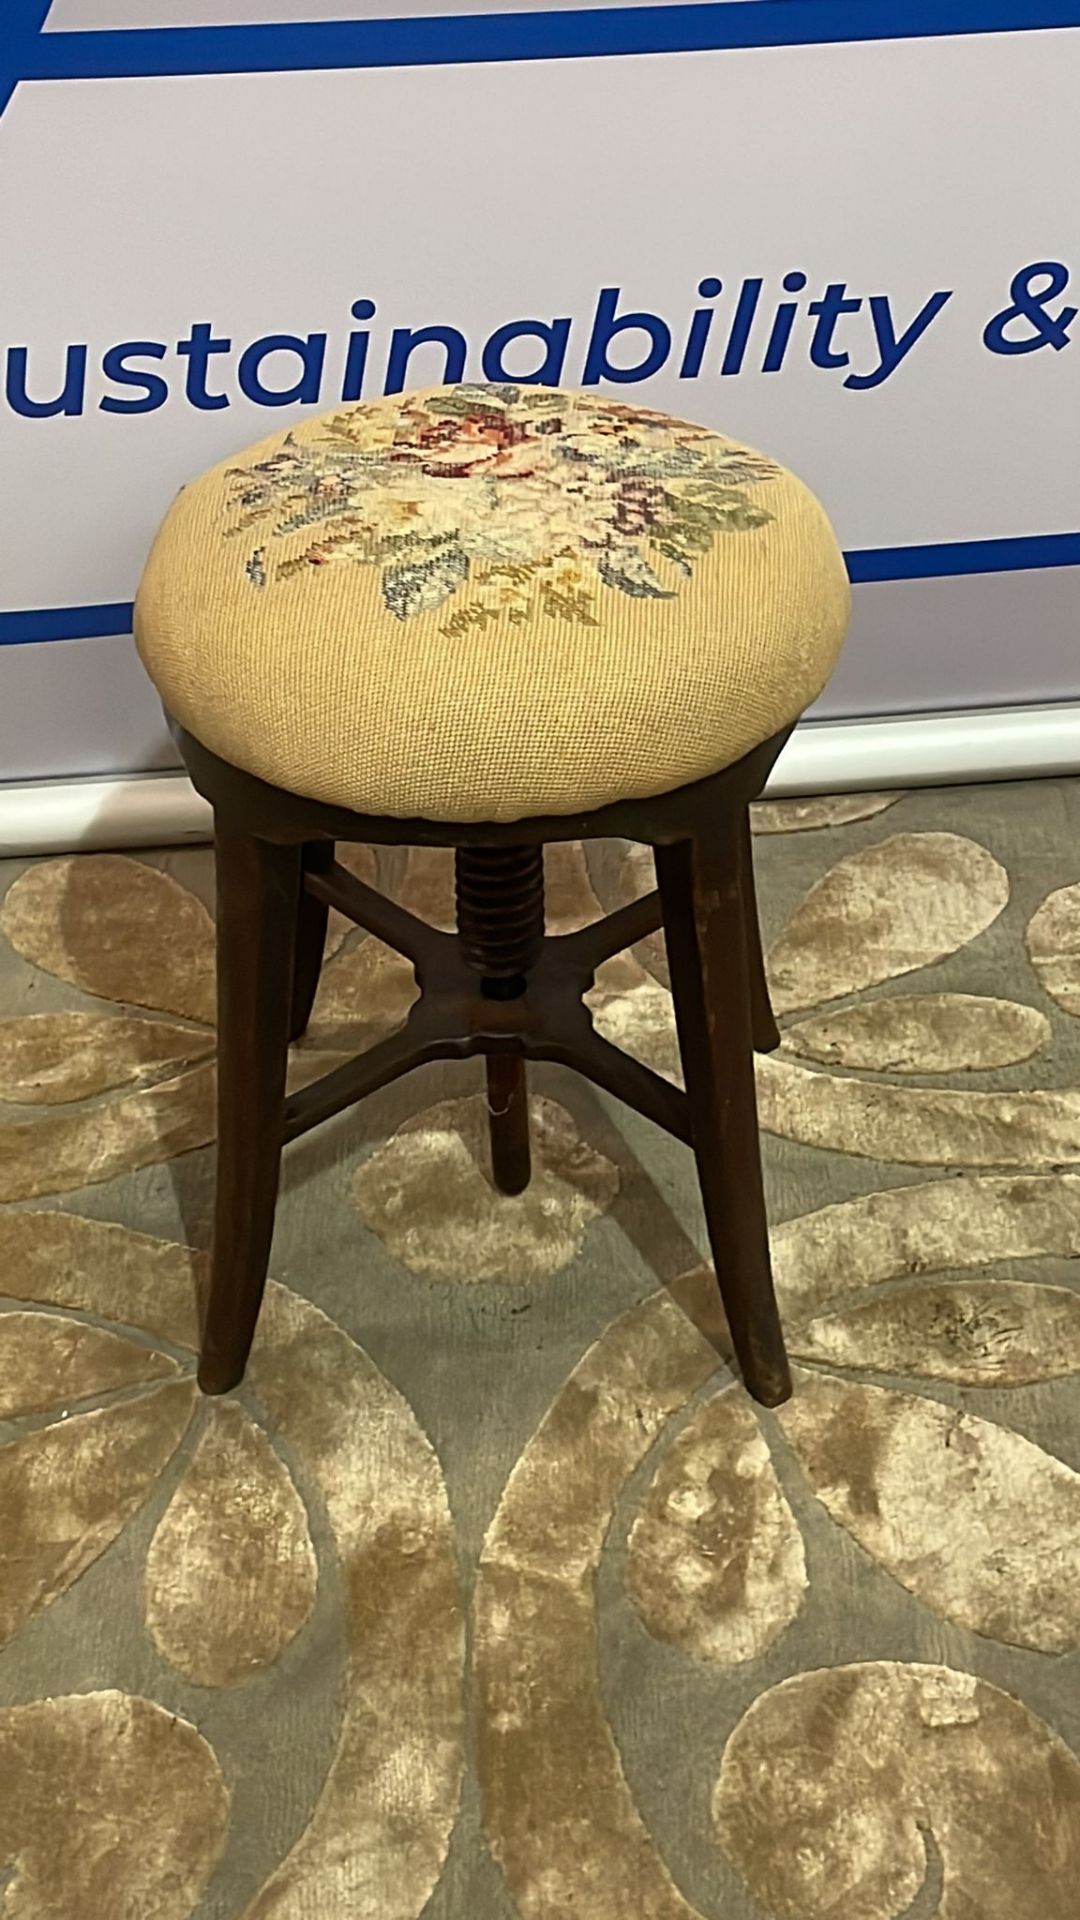 A Milk Maid Stool Finely Upholstered With A Floral Print Pad Seat 36 x 45cm - Image 3 of 4